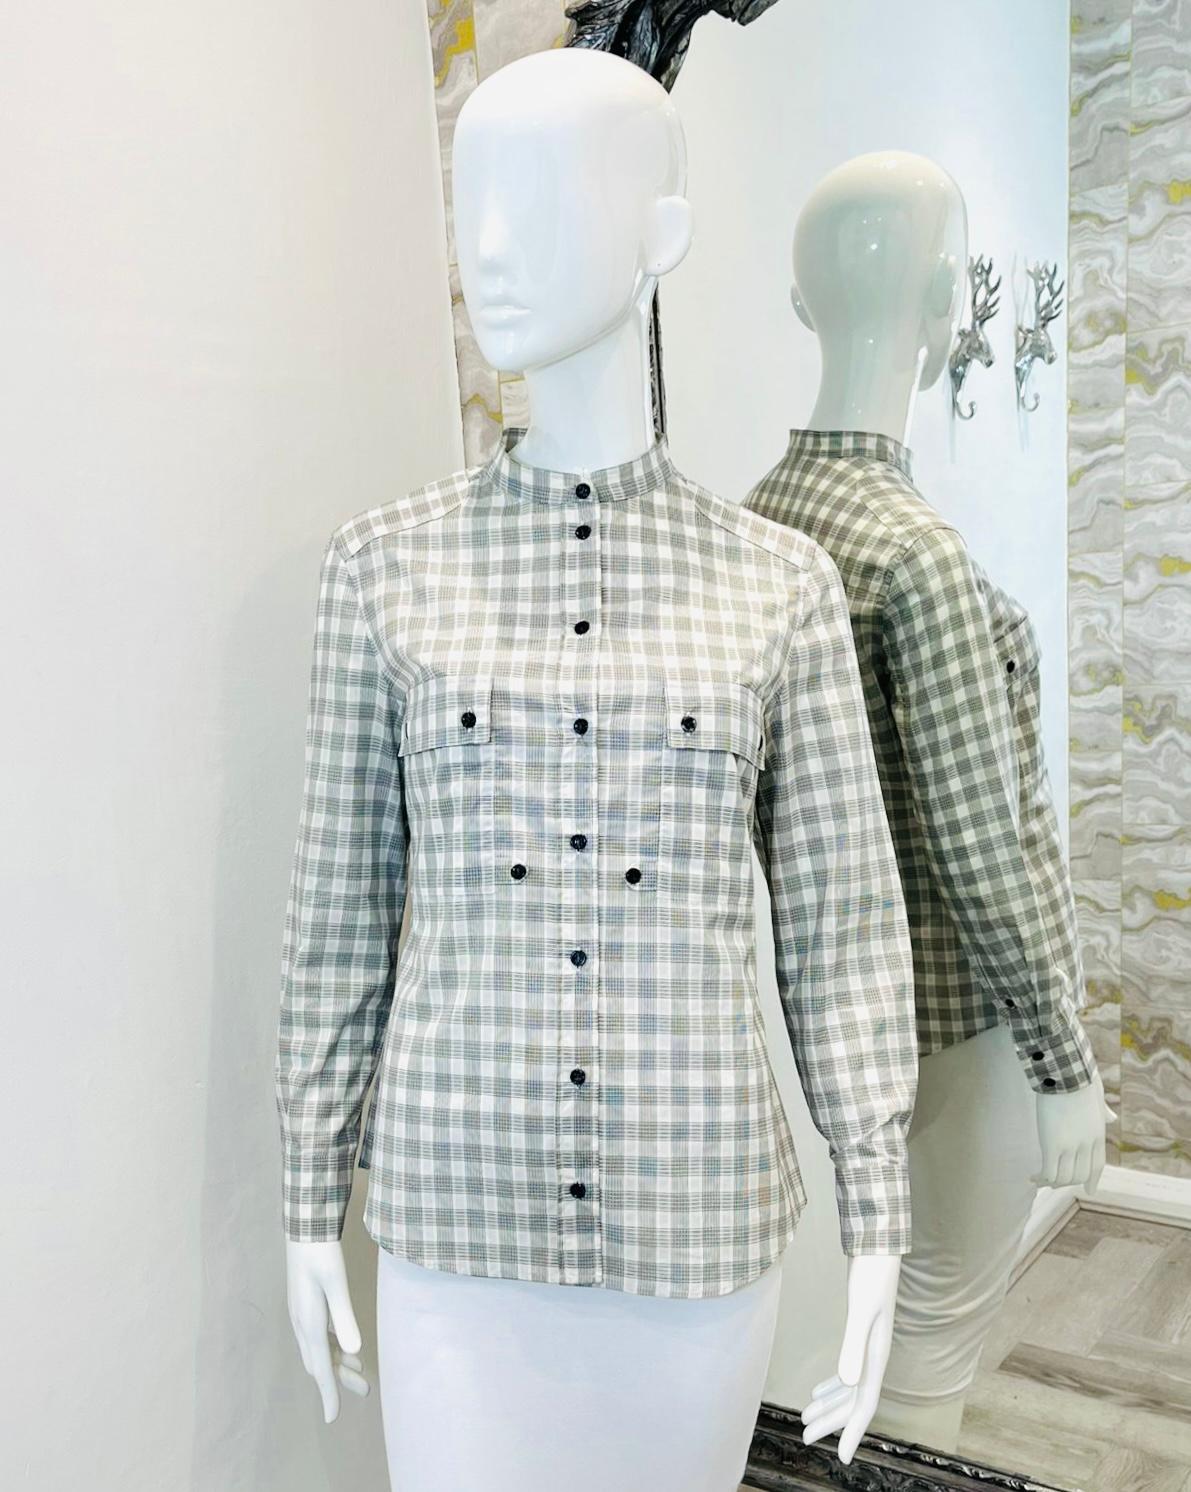 Saint Laurent Checked Cotton Shirt

Light grey, long sleeved shirt designed with check pattern.

Featuring a standing collar and black button closure.

Detailed with flap chest pockets and buttoned cuffs.

Size – 40FR

Condition – Very